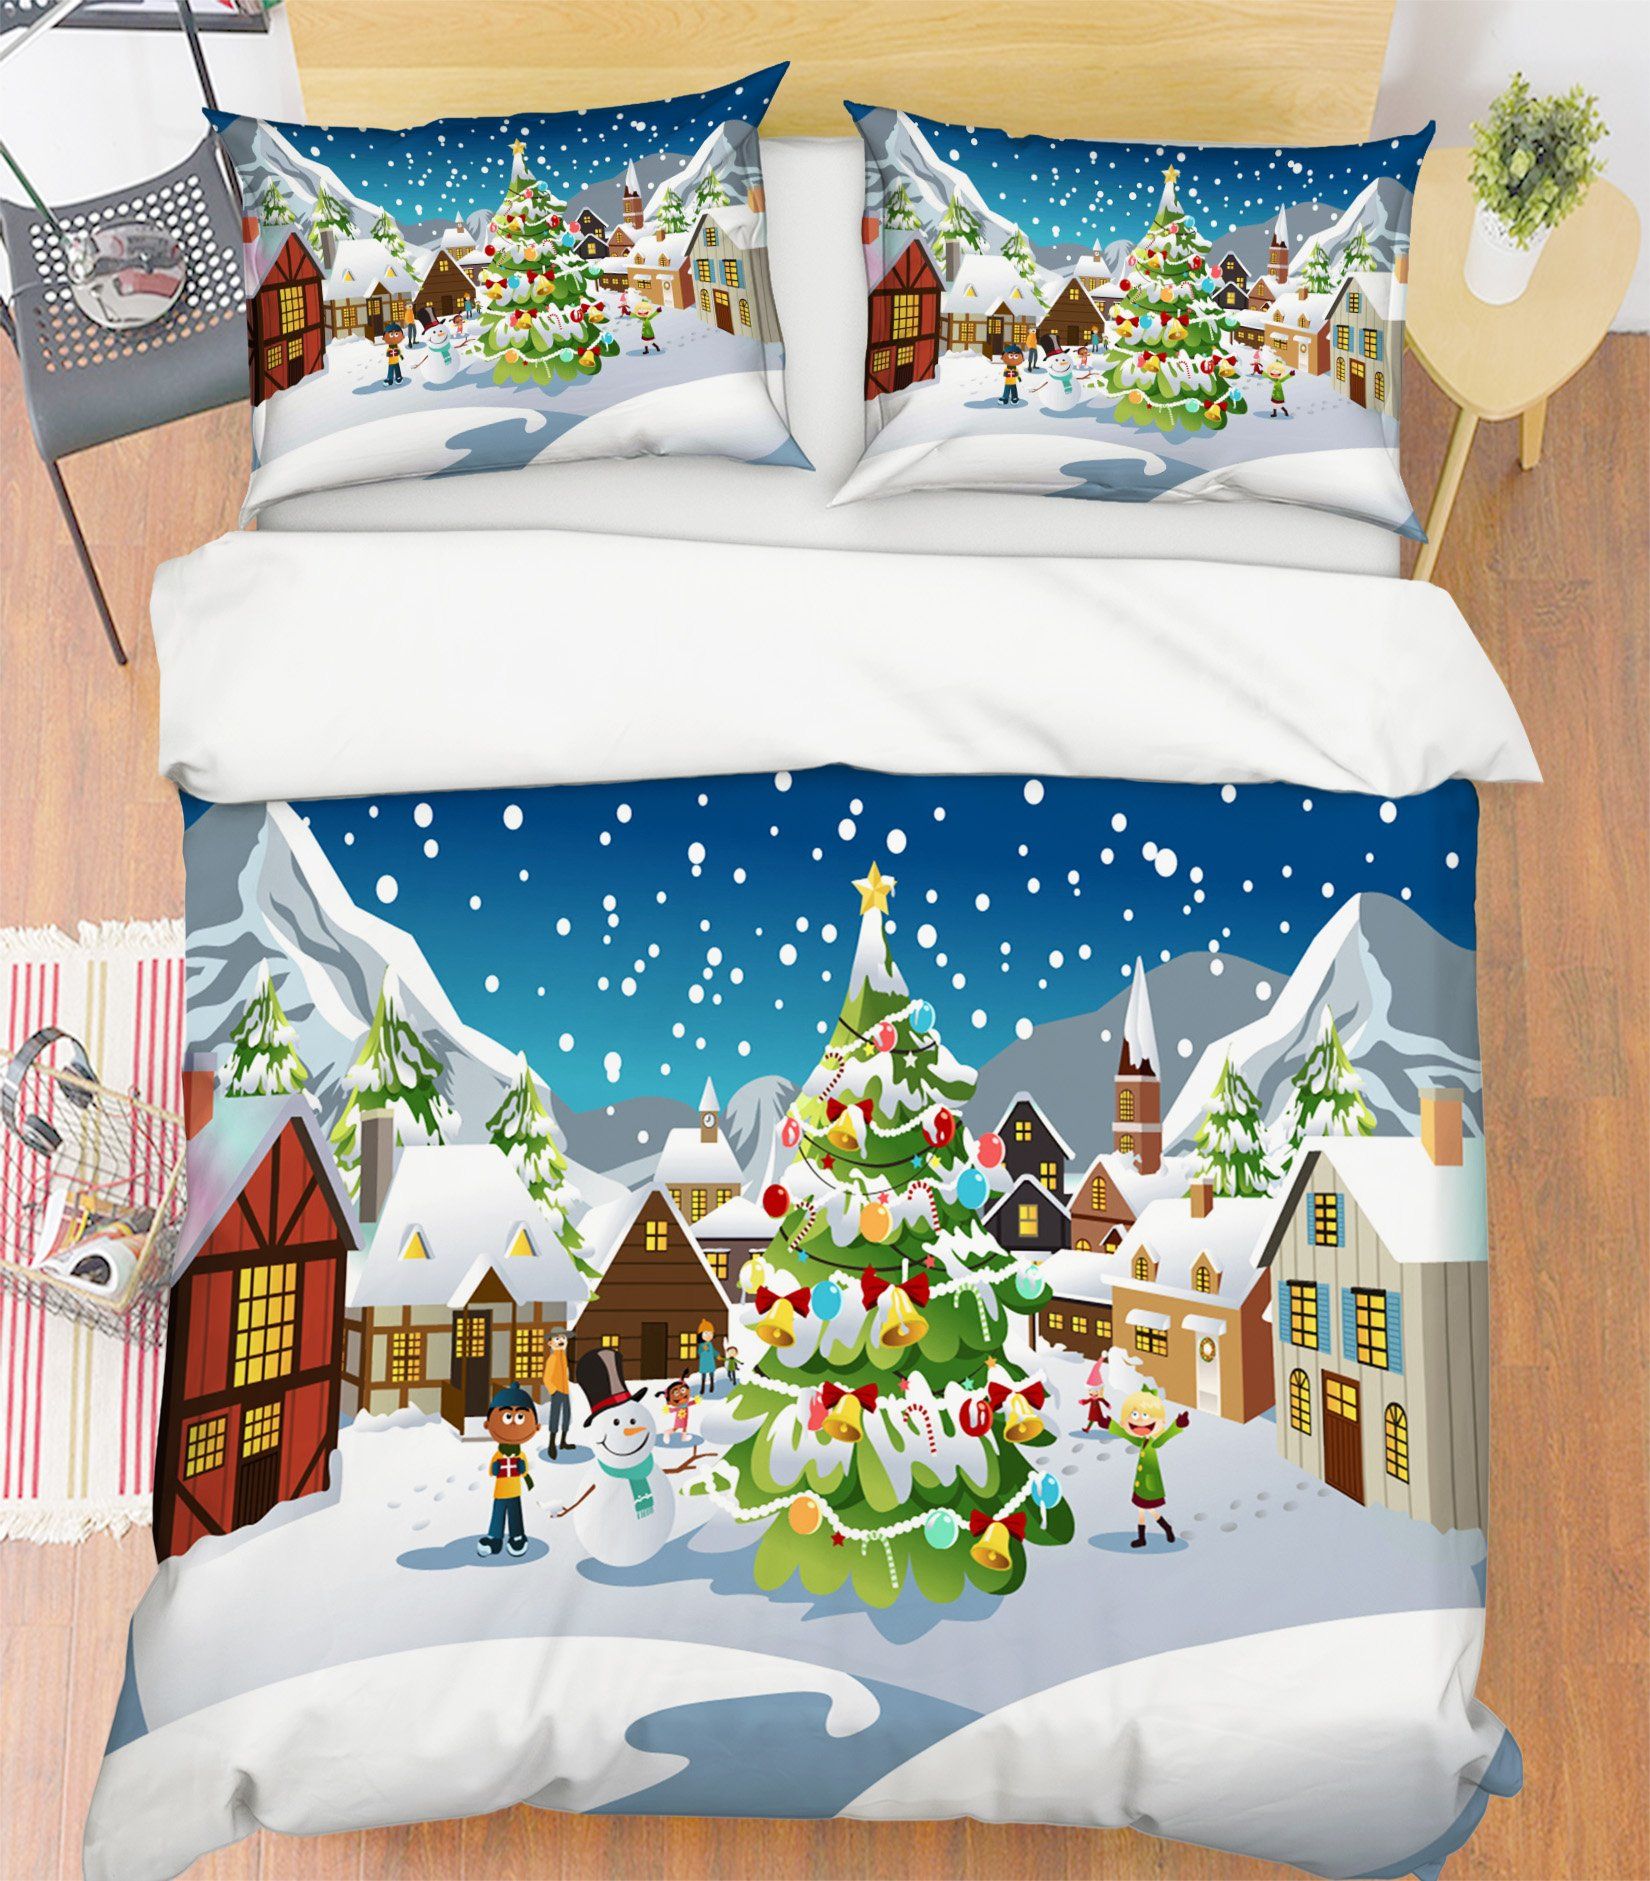 3D Christmas Rural Snow 26 Bed Pillowcases Quilt Quiet Covers AJ Creativity Home 